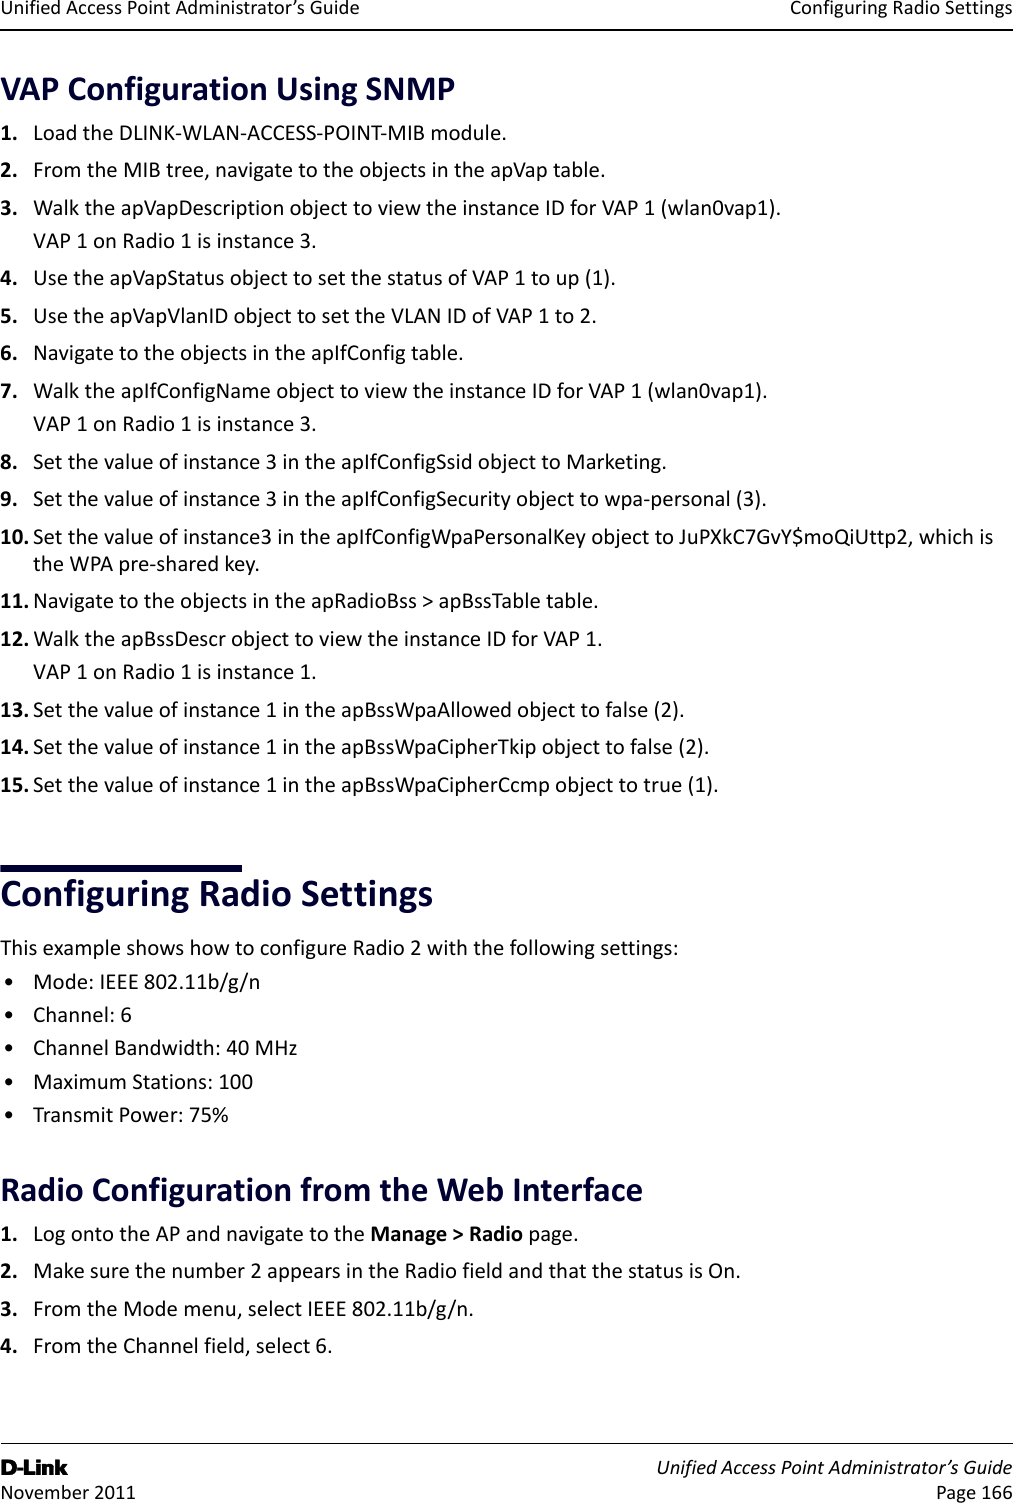 ConfiguringRadioSettingsD-Link UnifiedAccessPointAdministrator’sGuide November2011 Page166UnifiedAccessPointAdministrator’sGuideVAPConfigurationUsingSNMP1. LoadtheDLINK‐WLAN‐ACCESS‐POINT‐MIBmodule.2. FromtheMIBtree,navigatetotheobjectsintheapVaptable.3. WalktheapVapDescriptionobjecttoviewtheinstanceIDforVAP1(wlan0vap1).VAP1onRadio1isinstance3.4. UsetheapVapStatusobjecttosetthestatusofVAP1toup(1).5. UsetheapVapVlanIDobjecttosettheVLANIDofVAP1to2.6. NavigatetotheobjectsintheapIfConfigtable.7. WalktheapIfConfigNameobjecttoviewtheinstanceIDforVAP1(wlan0vap1).VAP1onRadio1isinstance3.8. Setthevalueofinstance3intheapIfConfigSsidobjecttoMarketing.9. Setthevalueofinstance3intheapIfConfigSecurityobjecttowpa‐personal(3).10. Setthevalueofinstance3intheapIfConfigWpaPersonalKeyobjecttoJuPXkC7GvY$moQiUttp2,whichistheWPApre‐sharedkey.11. NavigatetotheobjectsintheapRadioBss&gt;apBssTabletable.12. WalktheapBssDescrobjecttoviewtheinstanceIDforVAP1.VAP1onRadio1isinstance1.13. Setthevalueofinstance1intheapBssWpaAllowedobjecttofalse(2).14. Setthevalueofinstance1intheapBssWpaCipherTkipobjecttofalse(2).15. Setthevalueofinstance1intheapBssWpaCipherCcmpobjecttotrue(1).ConfiguringRadioSettingsThisexampleshowshowtoconfigureRadio2withthefollowingsettings:•Mode:IEEE802.11b/g/n•Channel:6•ChannelBandwidth:40MHz•MaximumStations:100•TransmitPower:75%RadioConfigurationfromtheWebInterface1. LogontotheAPandnavigatetotheManage&gt;Radiopage.2. Makesurethenumber2appearsintheRadiofieldandthatthestatusisOn.3. FromtheModemenu,selectIEEE802.11b/g/n.4. FromtheChannelfield,select6.